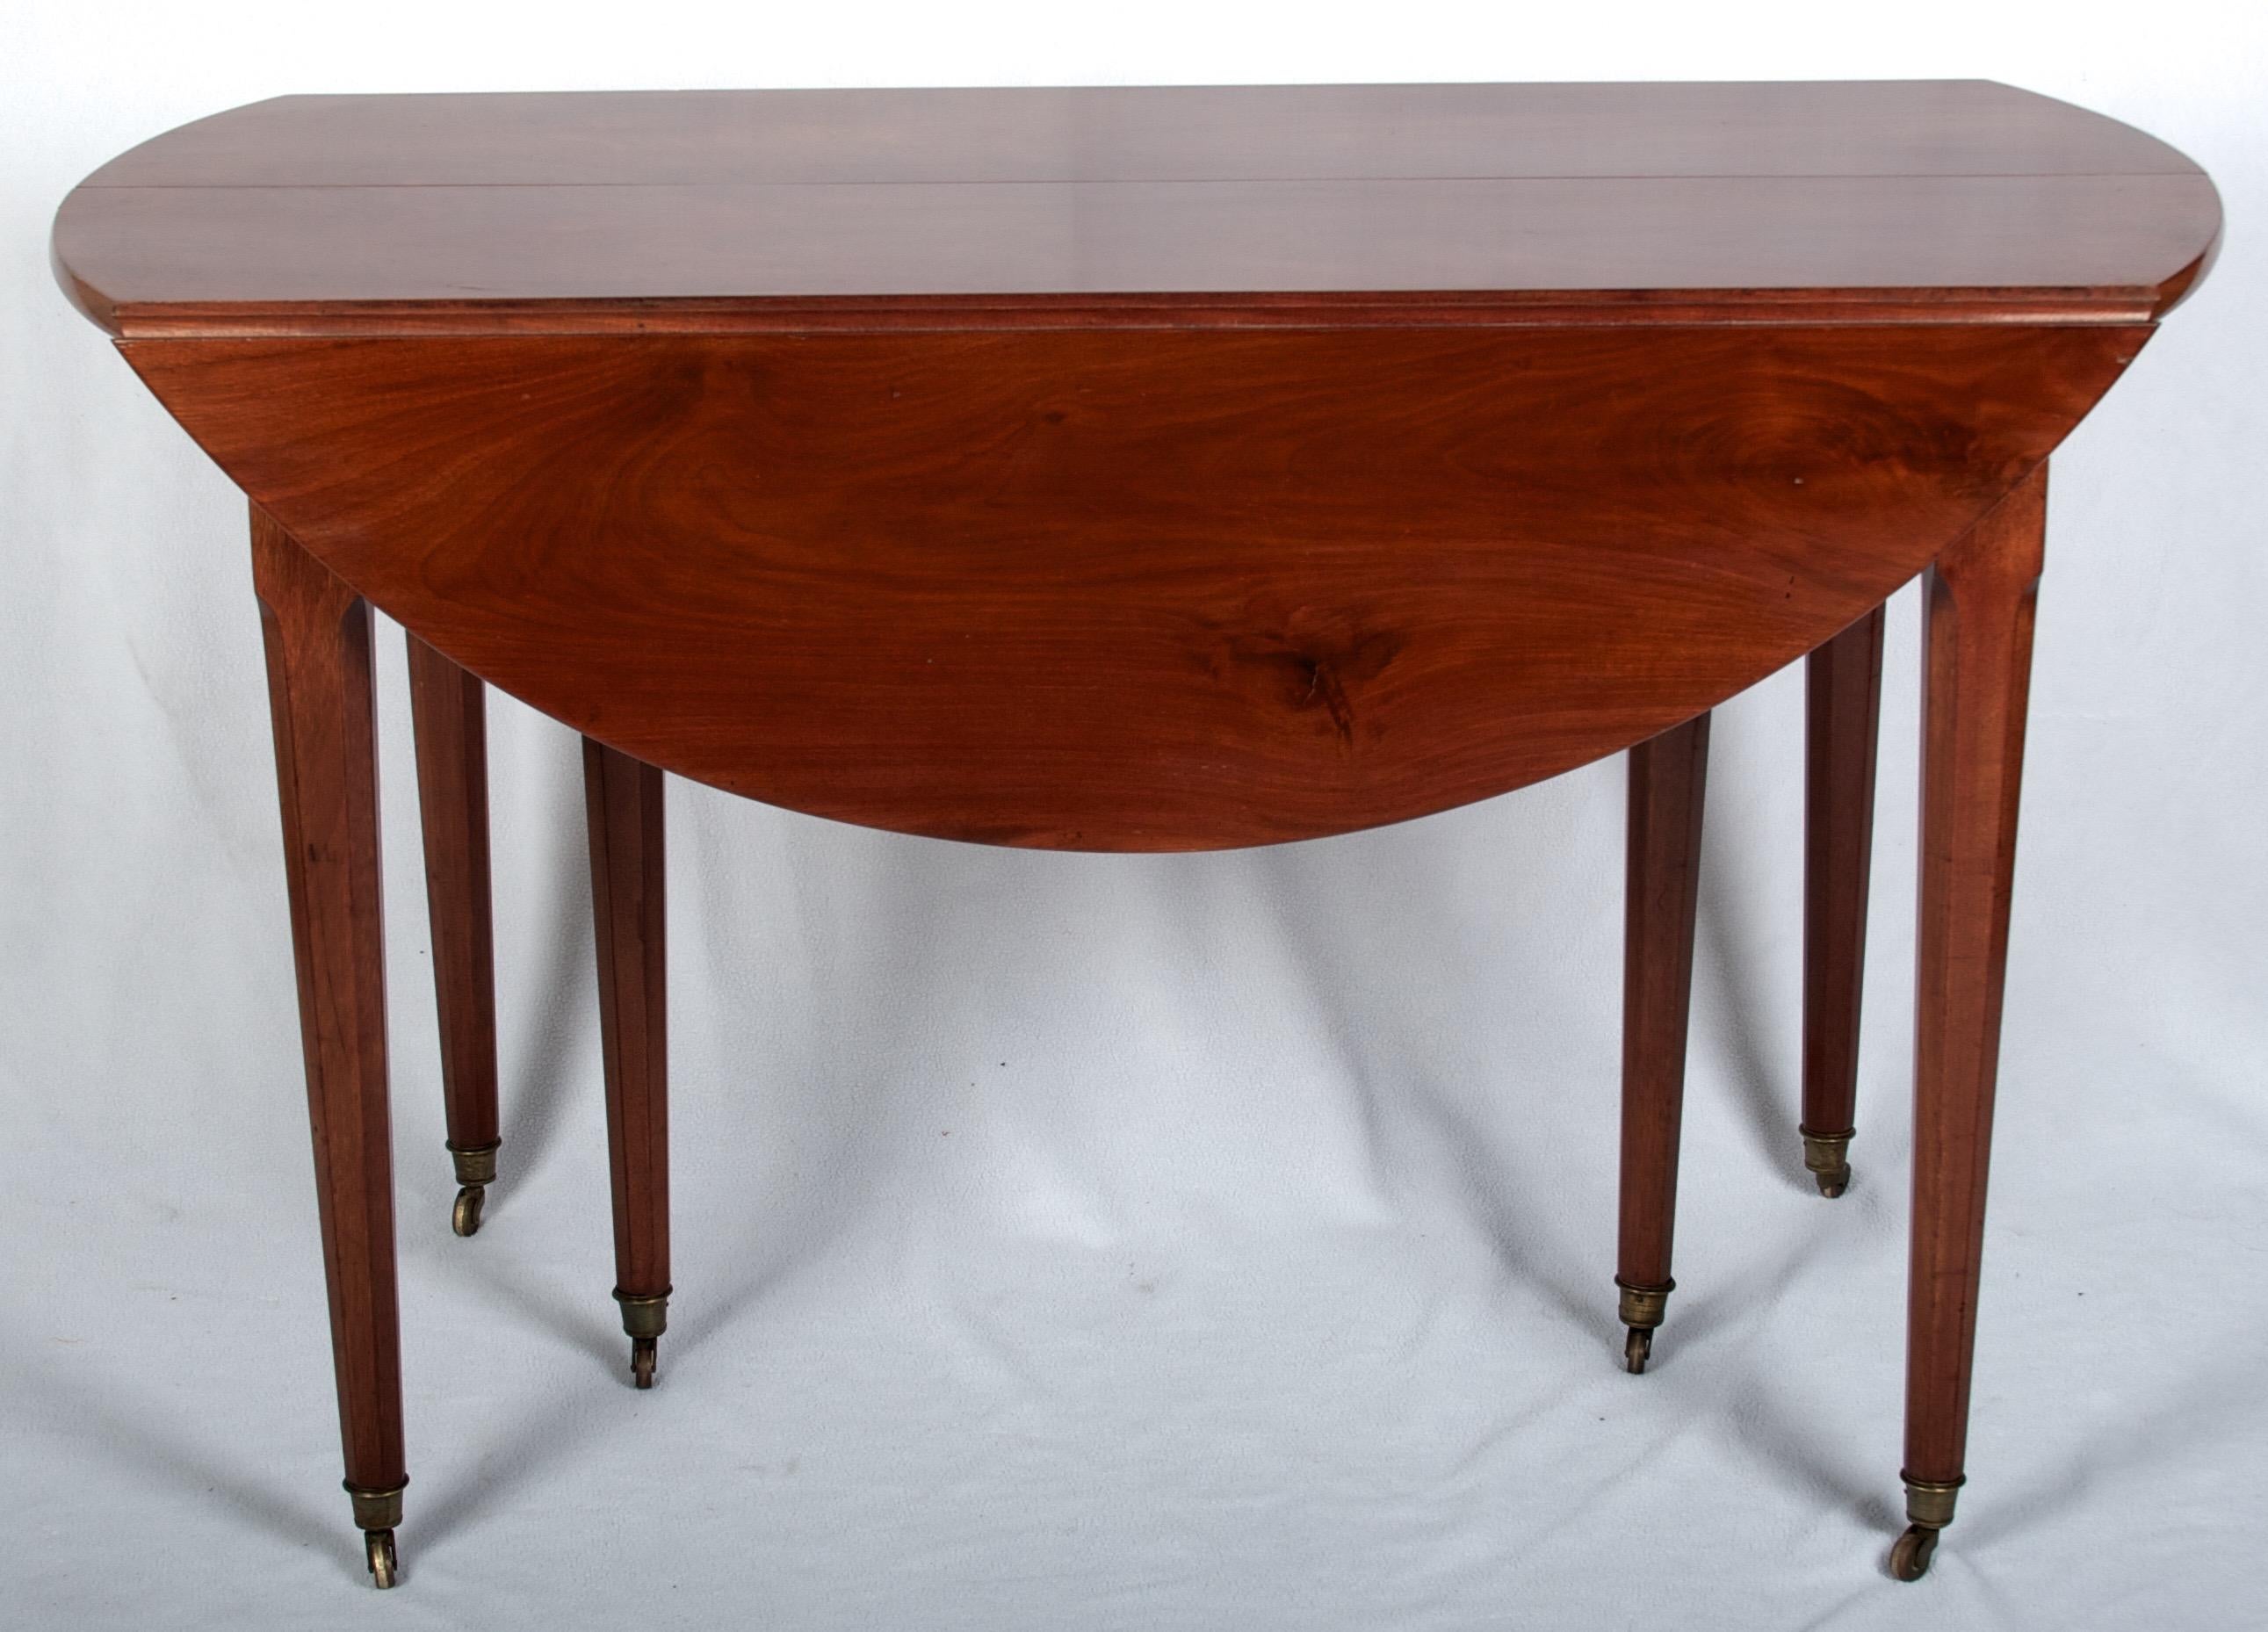 A Louis XVI dining table in acajou mahogany with two leaves.
Leaves are not in acajou mahogany and probably of a later date.
The table opens to hold more than two leaves, so additional
leaves could be fabricated and the table could open to 96